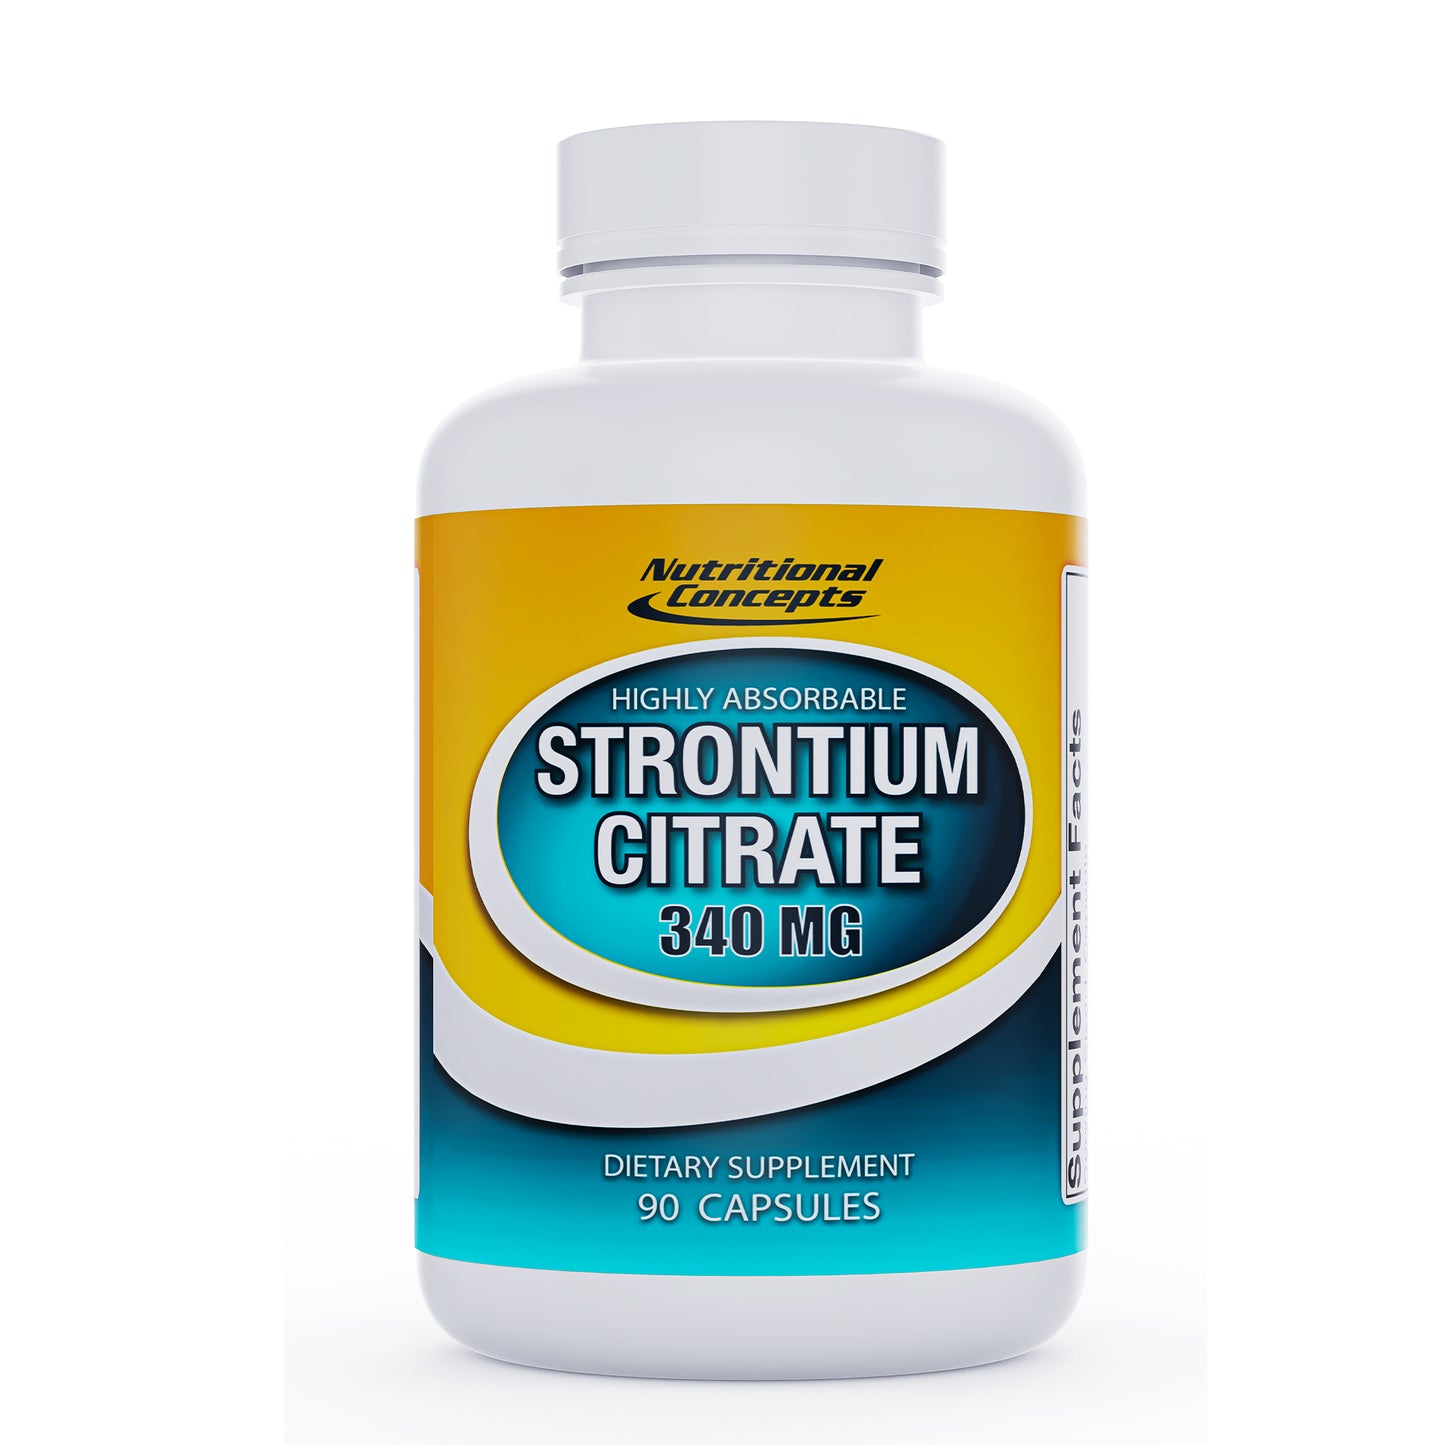 Nutritional Concepts Strontium Citrate: 340 Mg - 90 Capsules